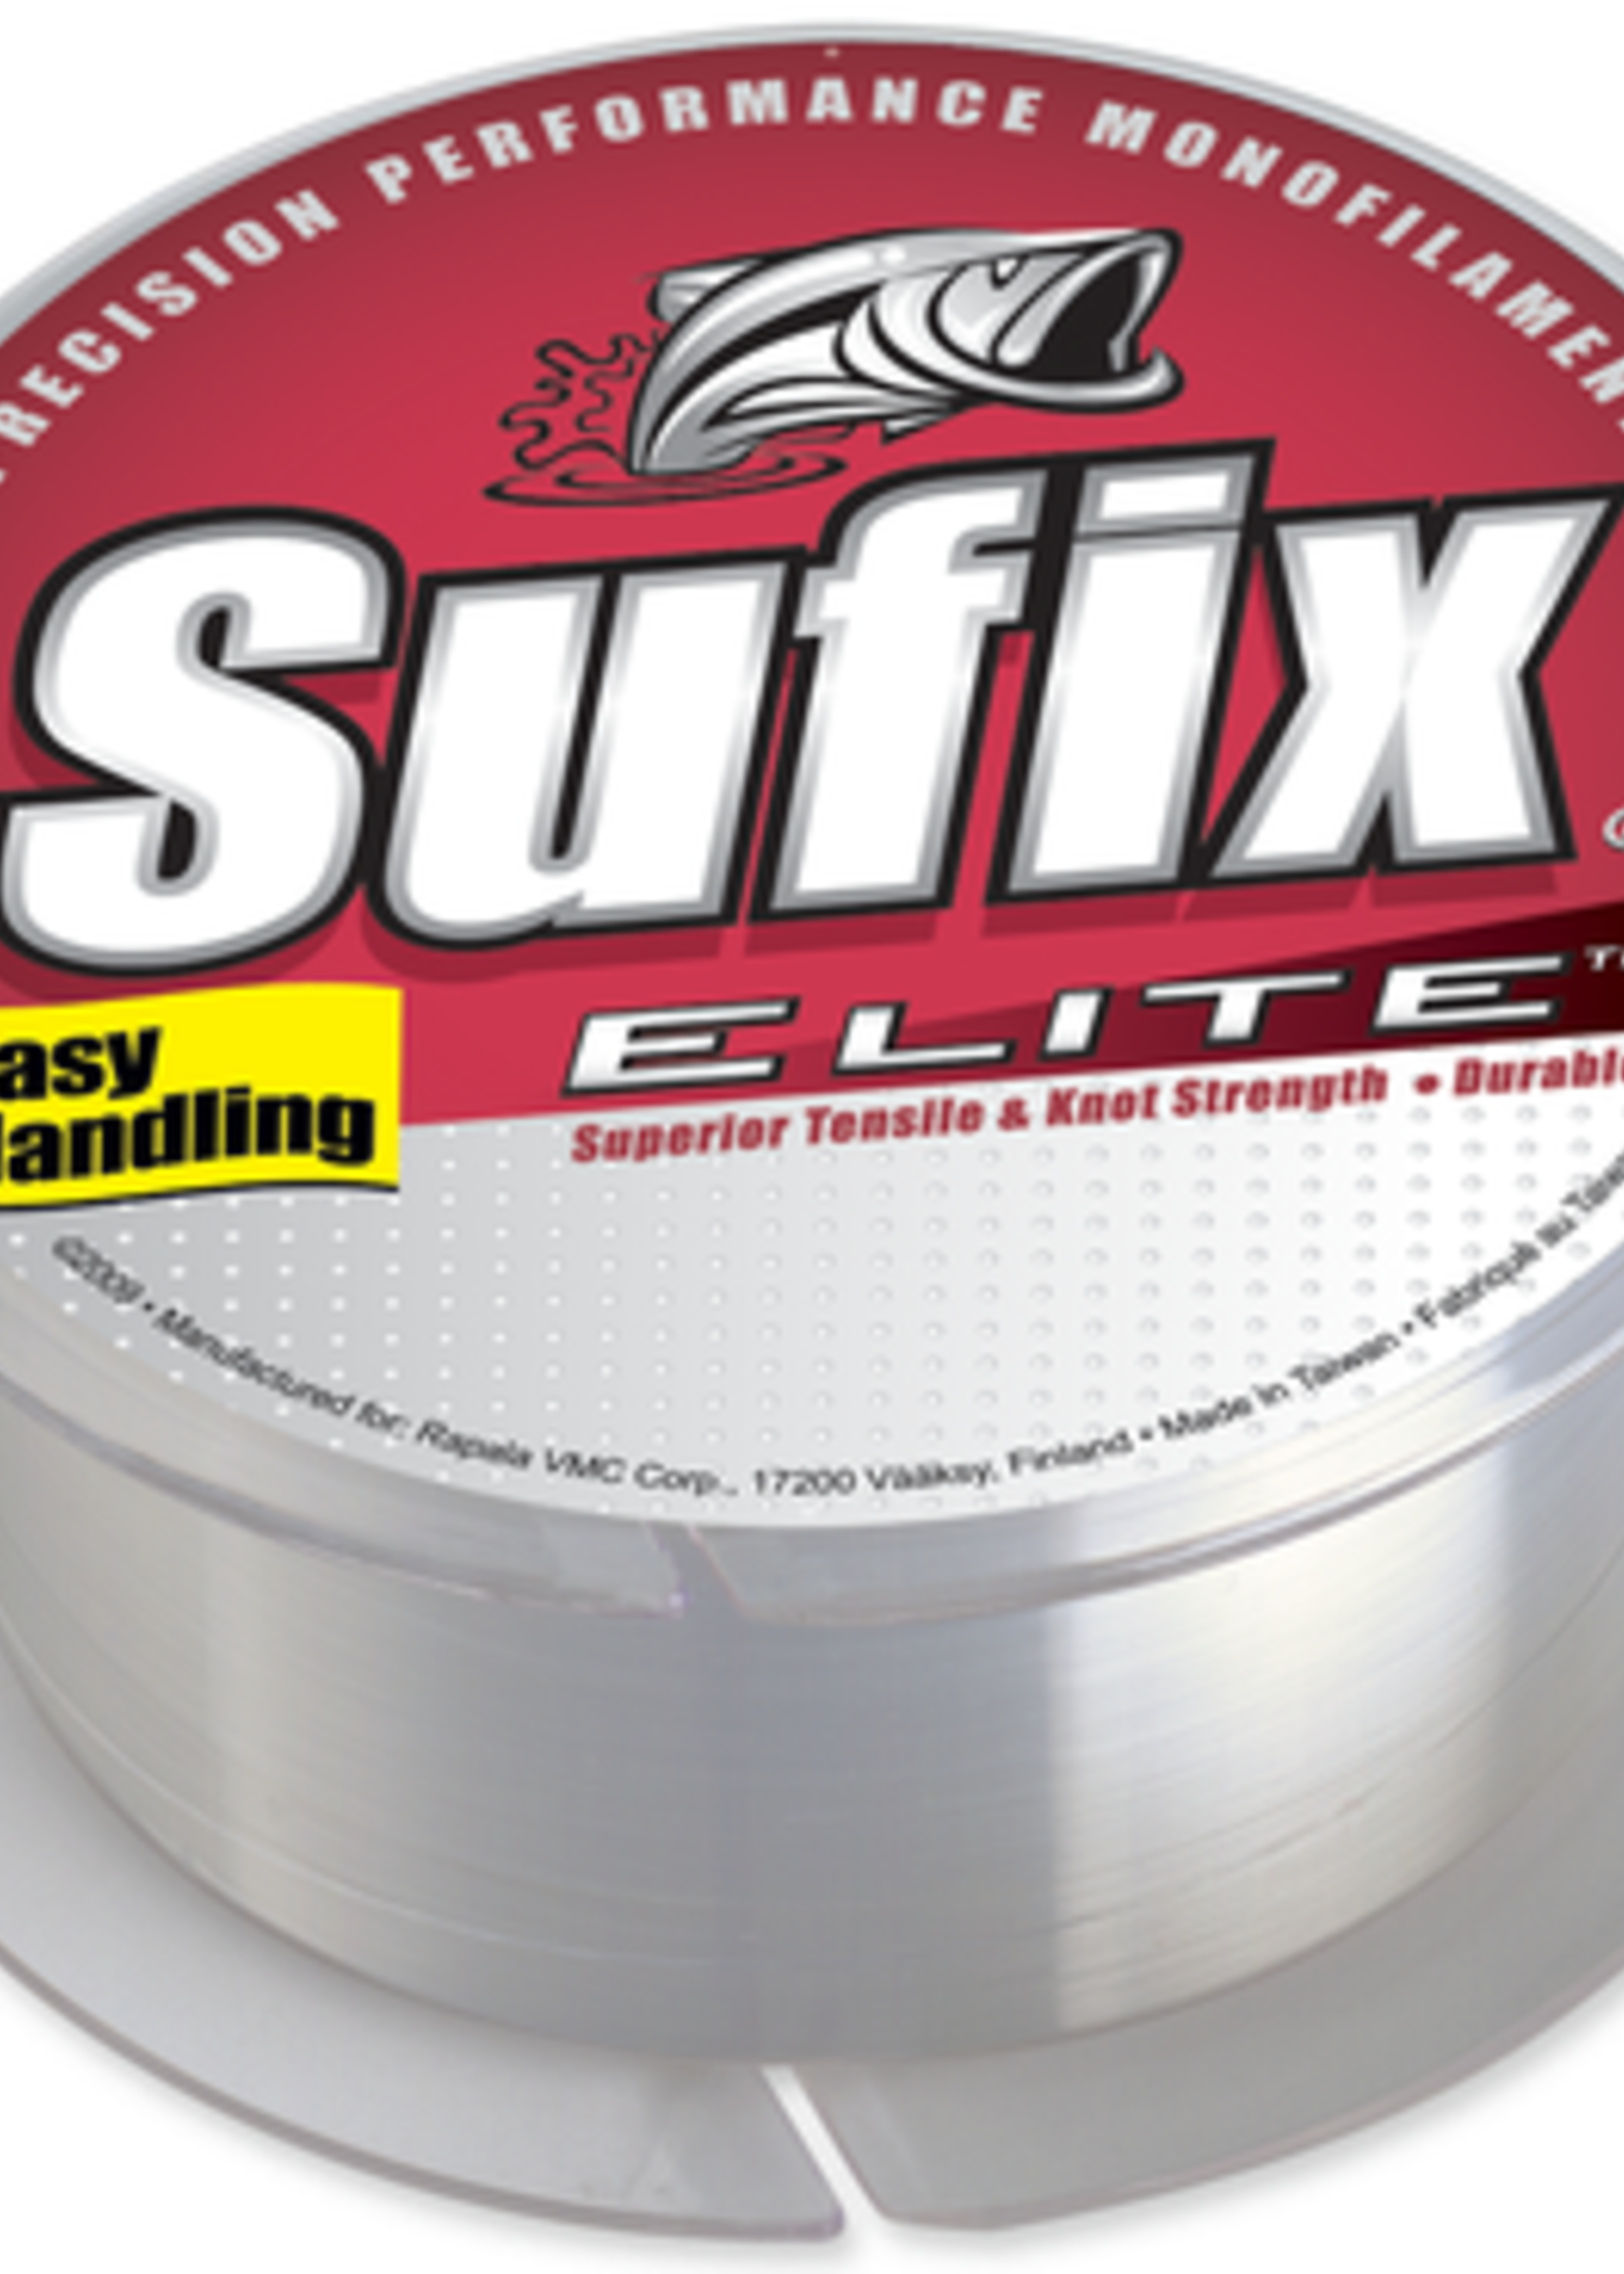 FISHING LINE – TW Outdoors